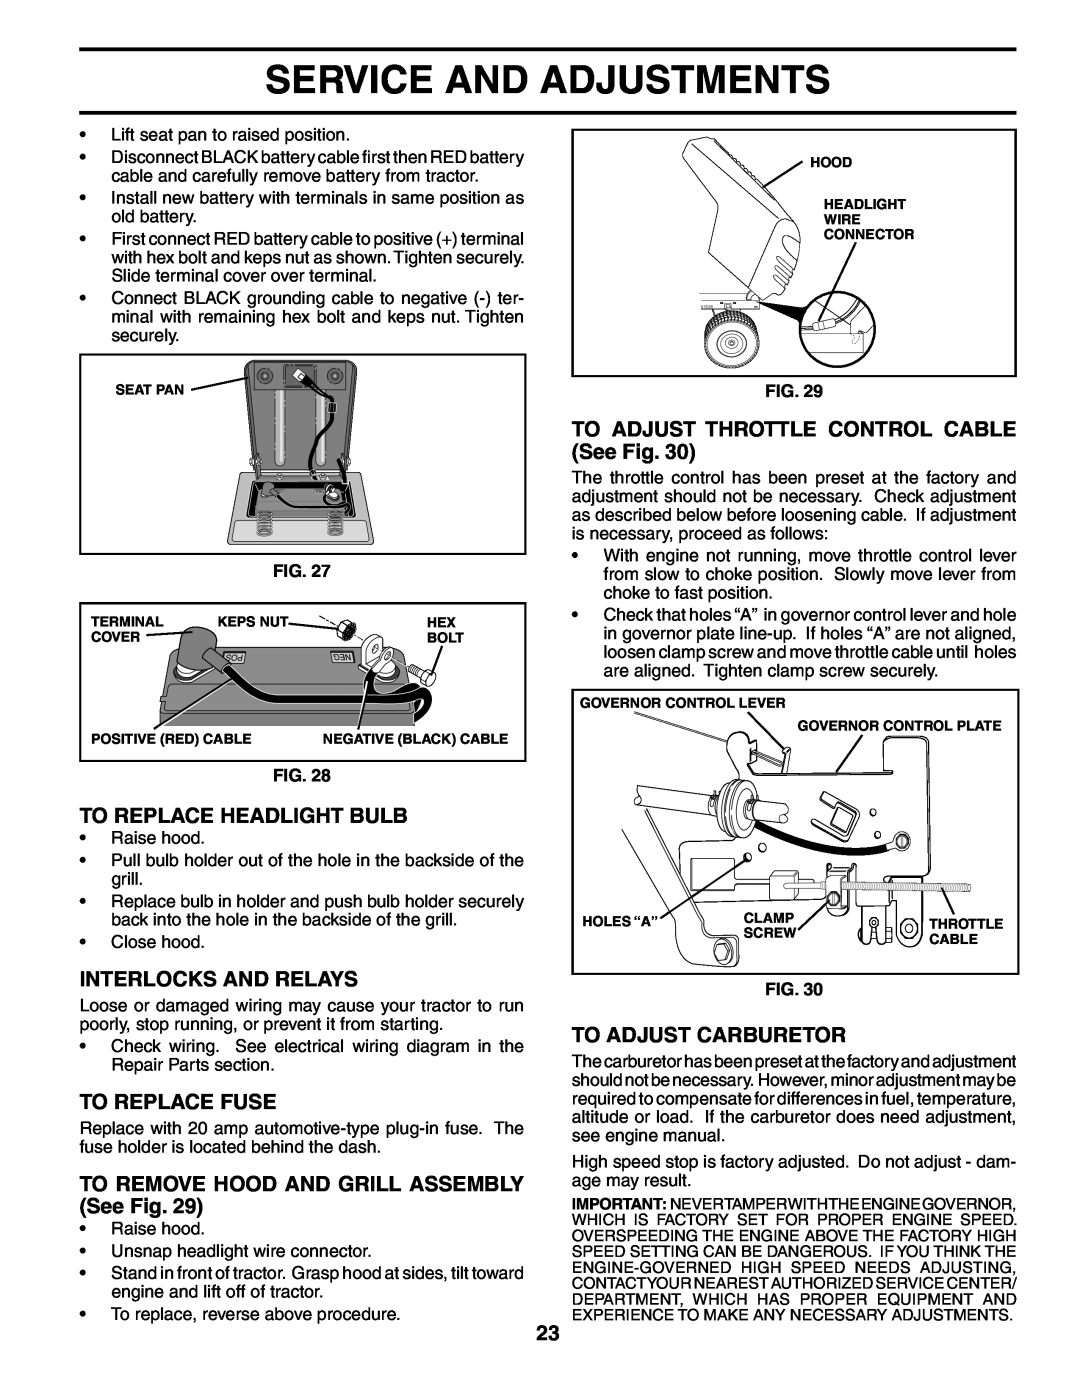 Poulan 187301 To Replace Headlight Bulb, Interlocks And Relays, To Replace Fuse, TO REMOVE HOOD AND GRILL ASSEMBLY See Fig 